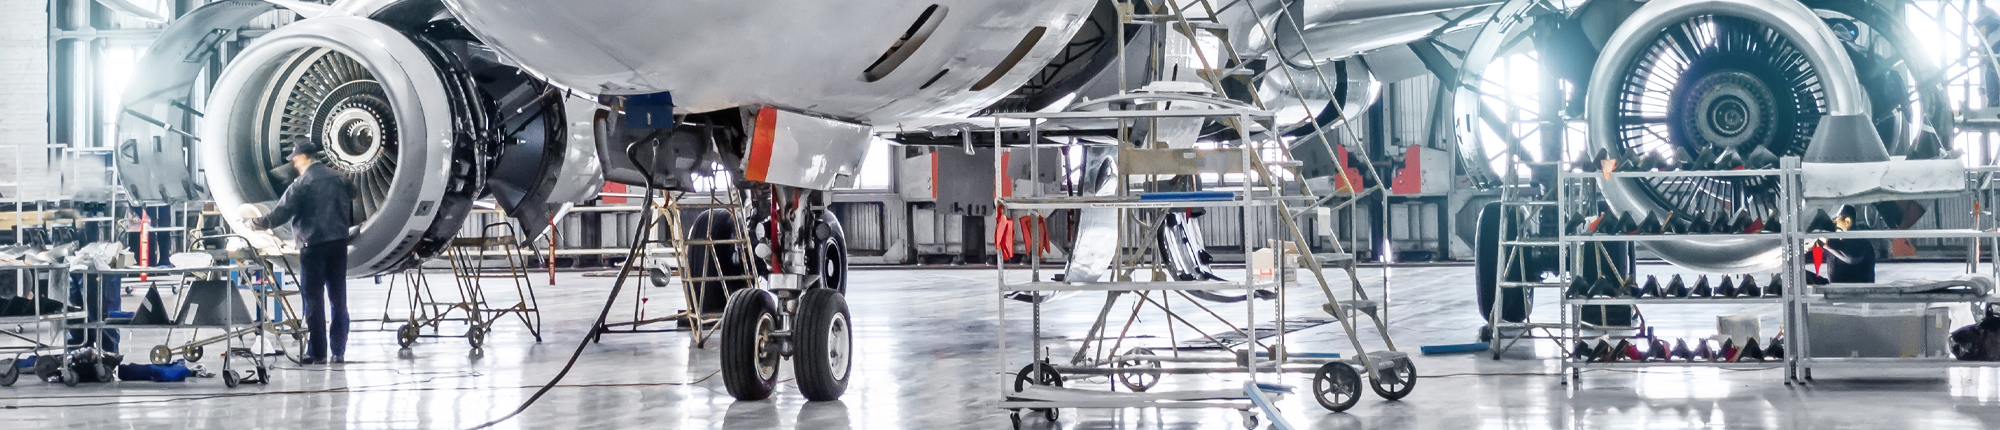 Aircraft in hangar with maintenance being carried out